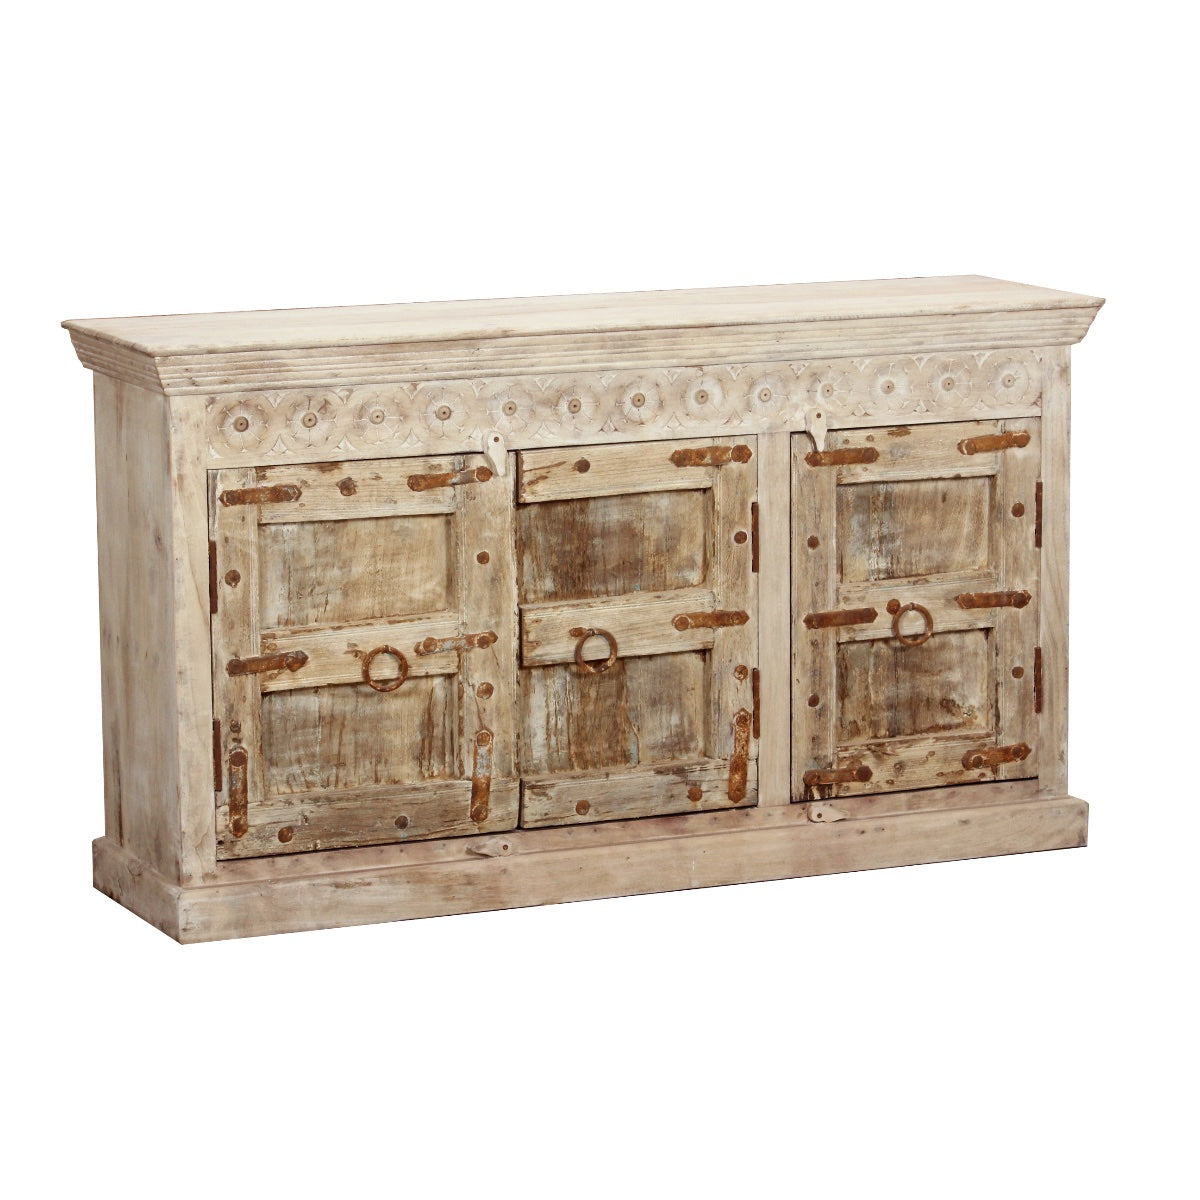 Indian Acid Wash Timber 180x40x80cm Sideboard | Assorted Designs